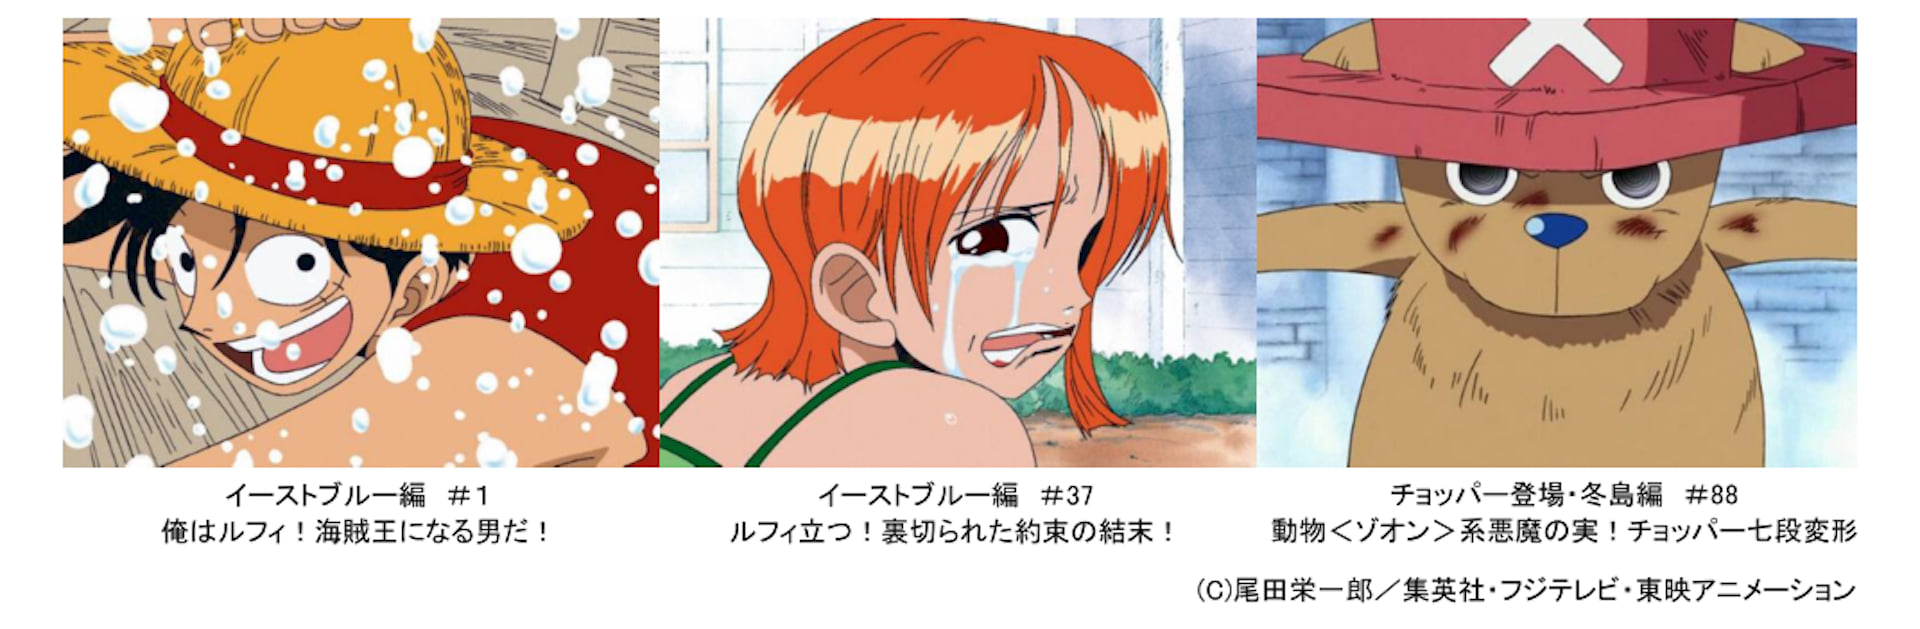 『ONE PIECE STAMPEDE』公開を前に“あの名場面をもう一度”『ワンピース』FODにて1～130話が無料配信｜放送開始20周年記念 video190708onepiece-fod_5-1920x629